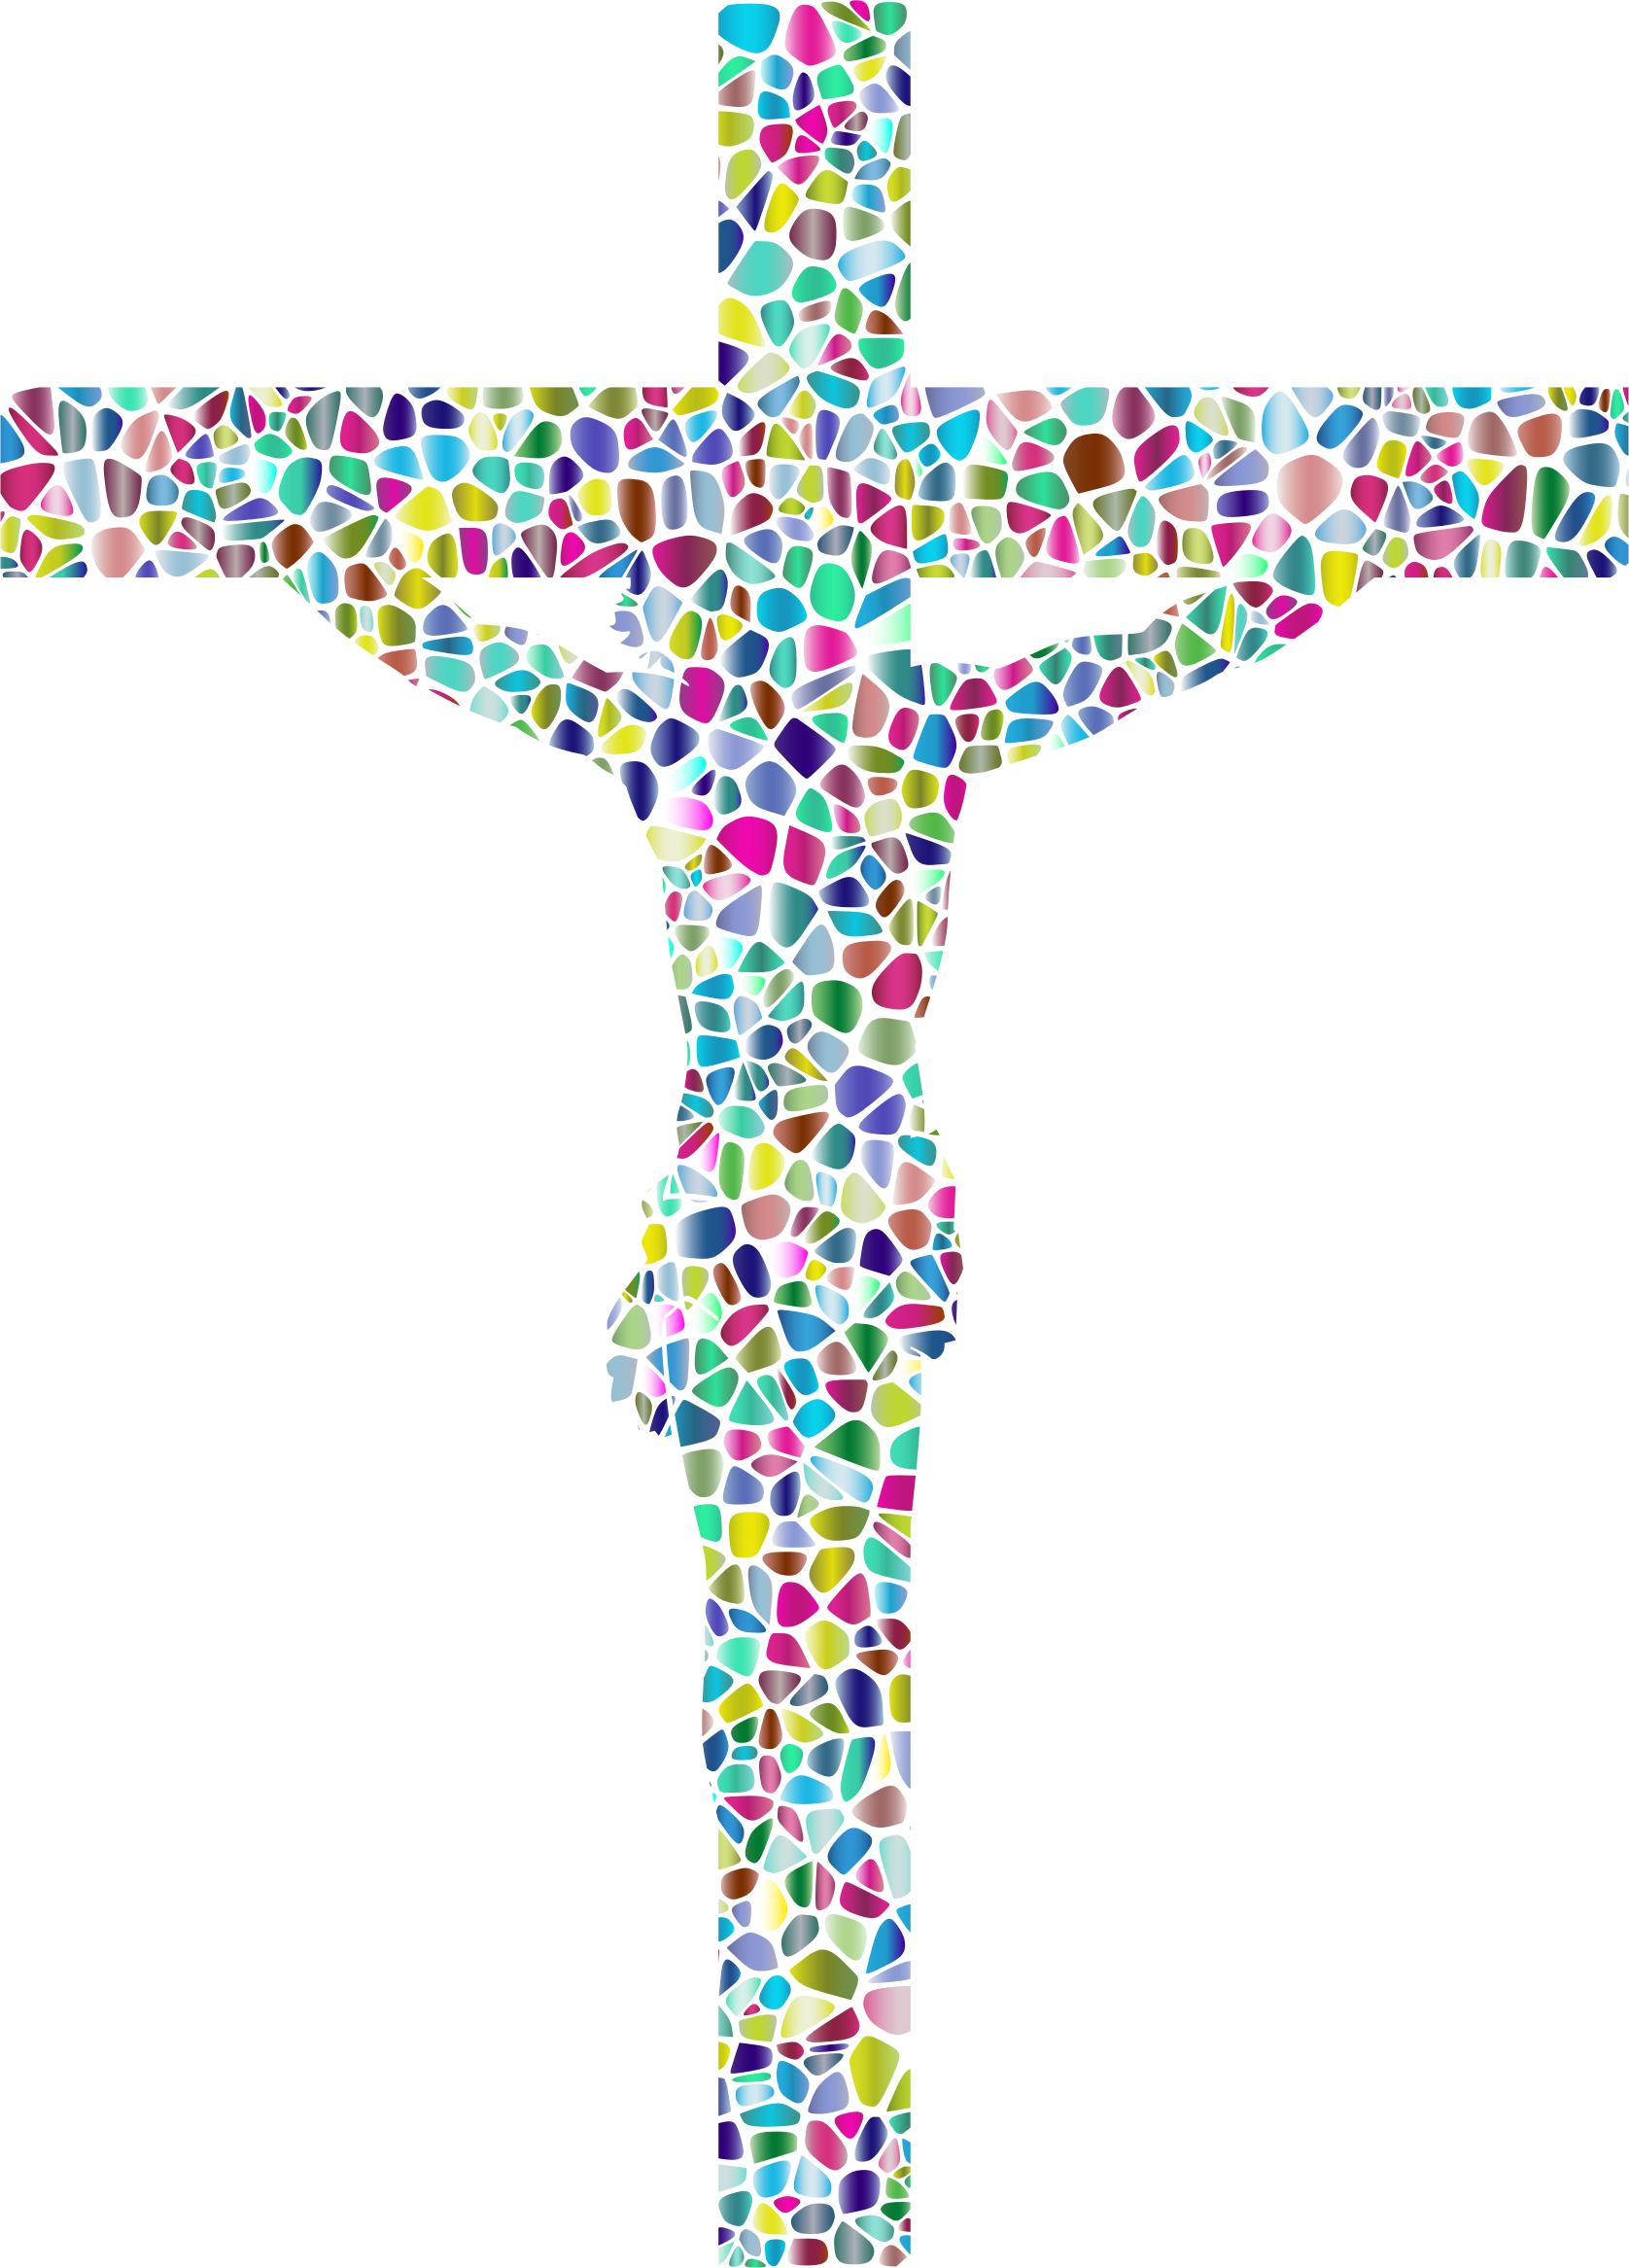 Polyprismatic Tiled Crucifix png